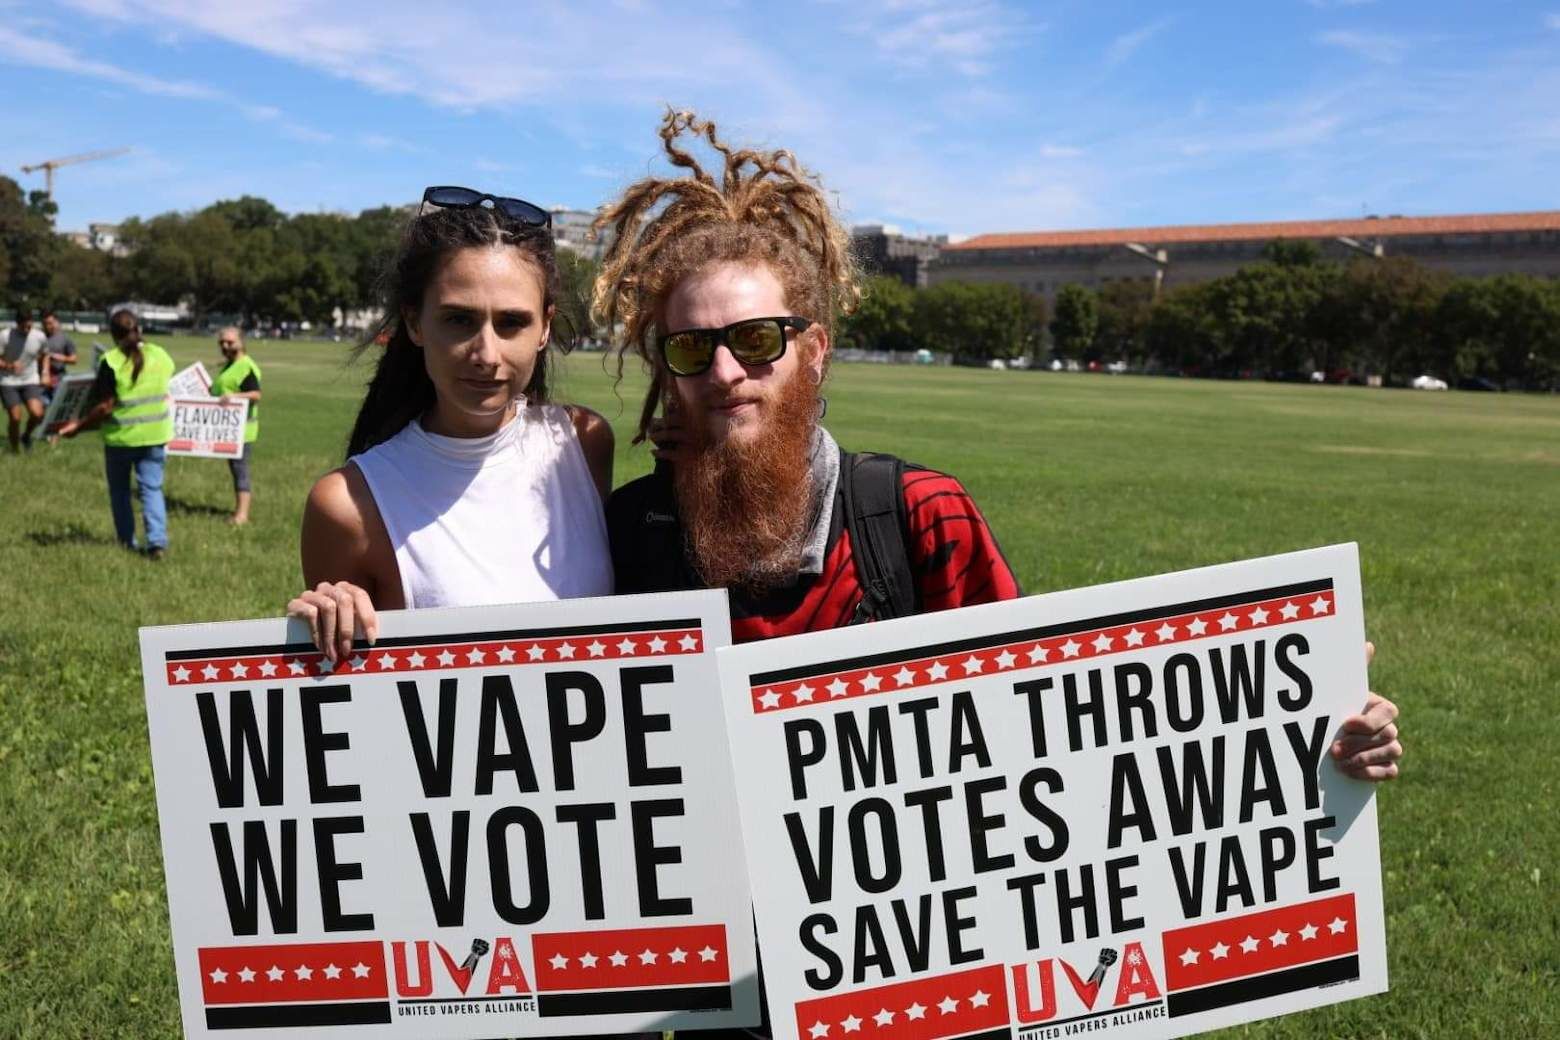 Hundreds Rally In Dc For Continued Access To Vaping And Other Smoke